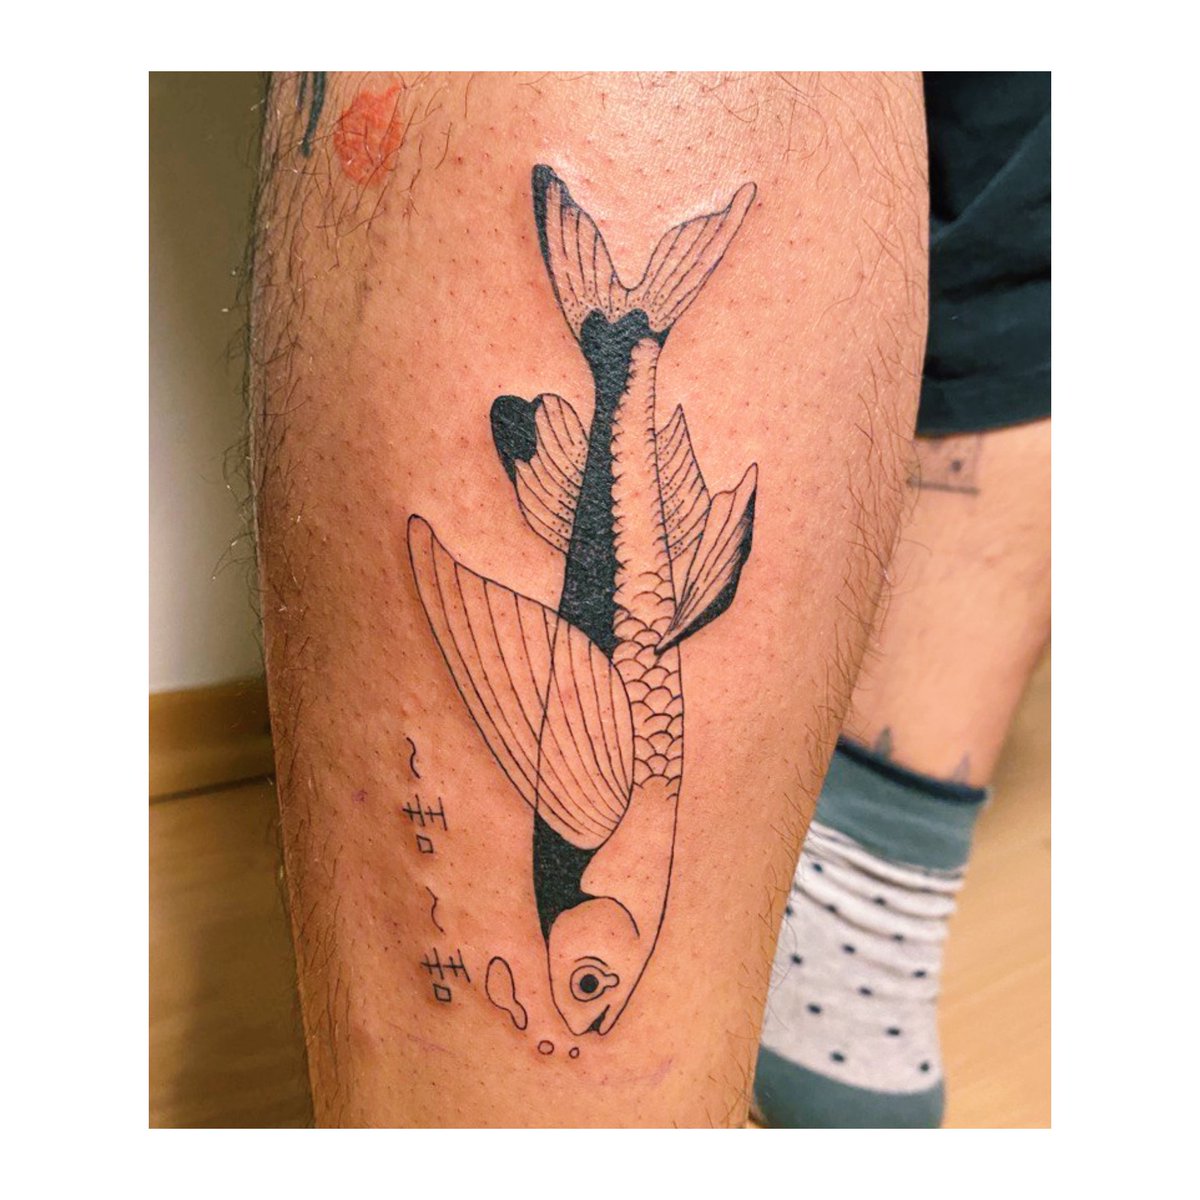 Flying fish tattoo for bf (again ?)? 